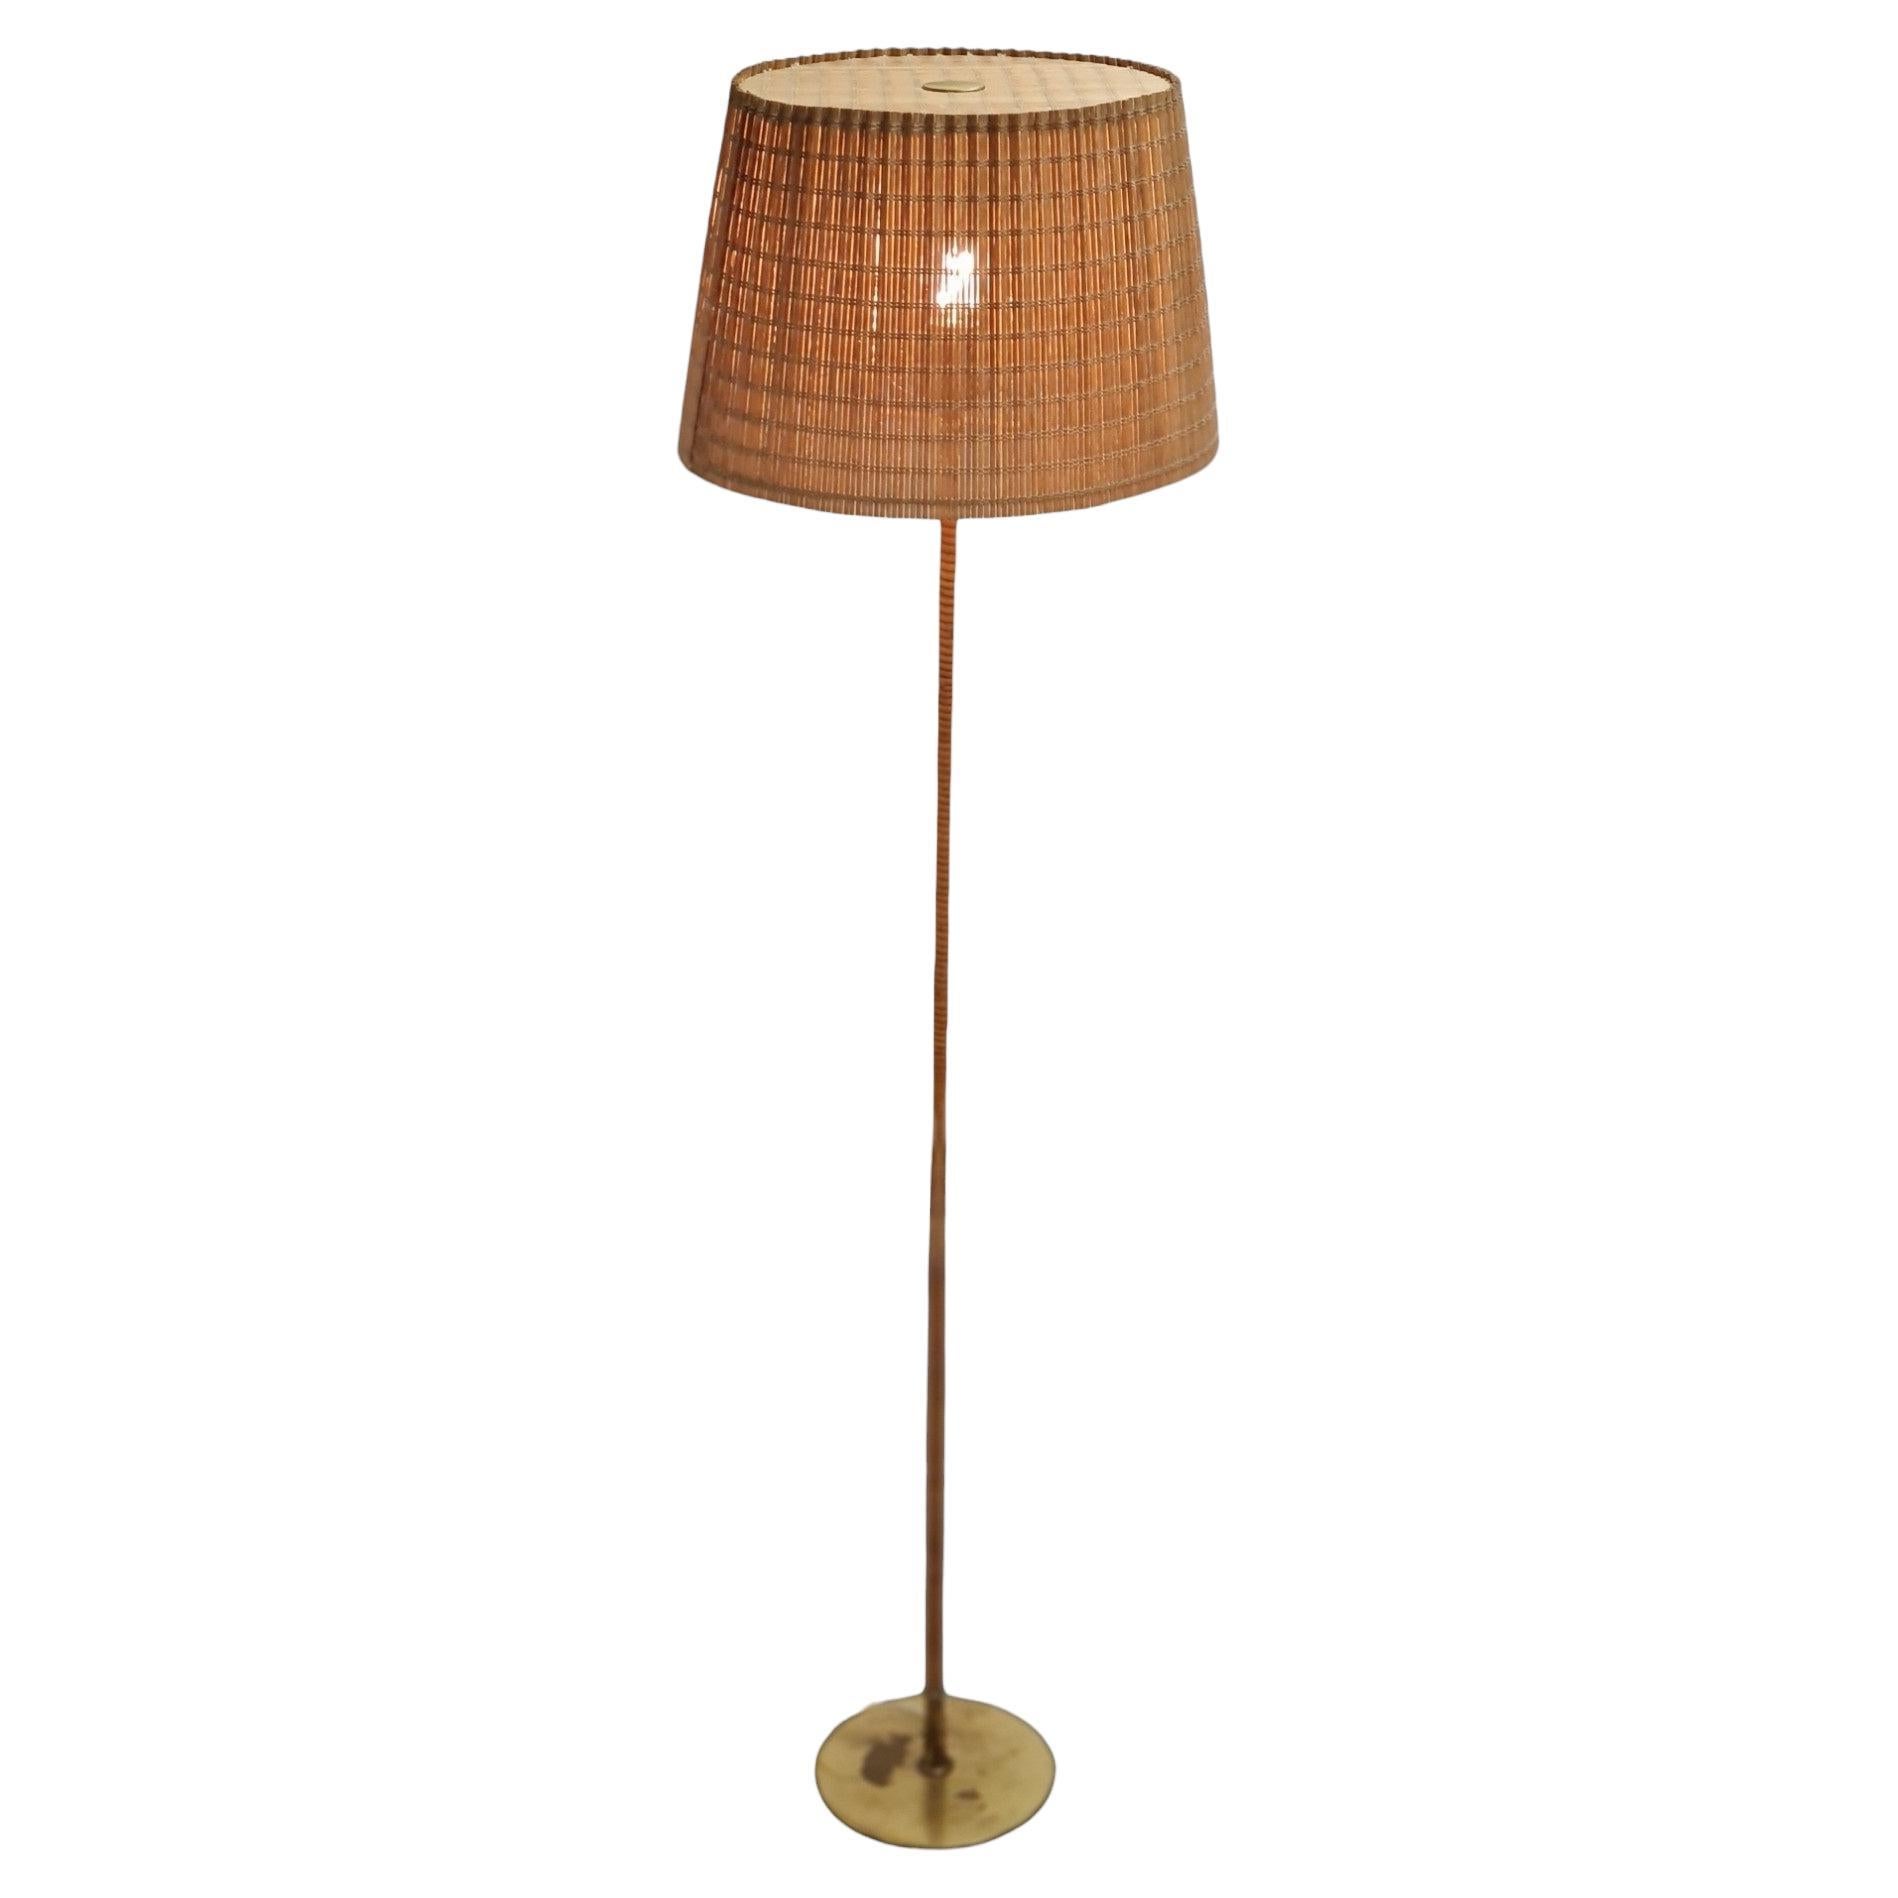 Lampadaire Paavo Tynell modèle 9627, Taito Oy  en vente